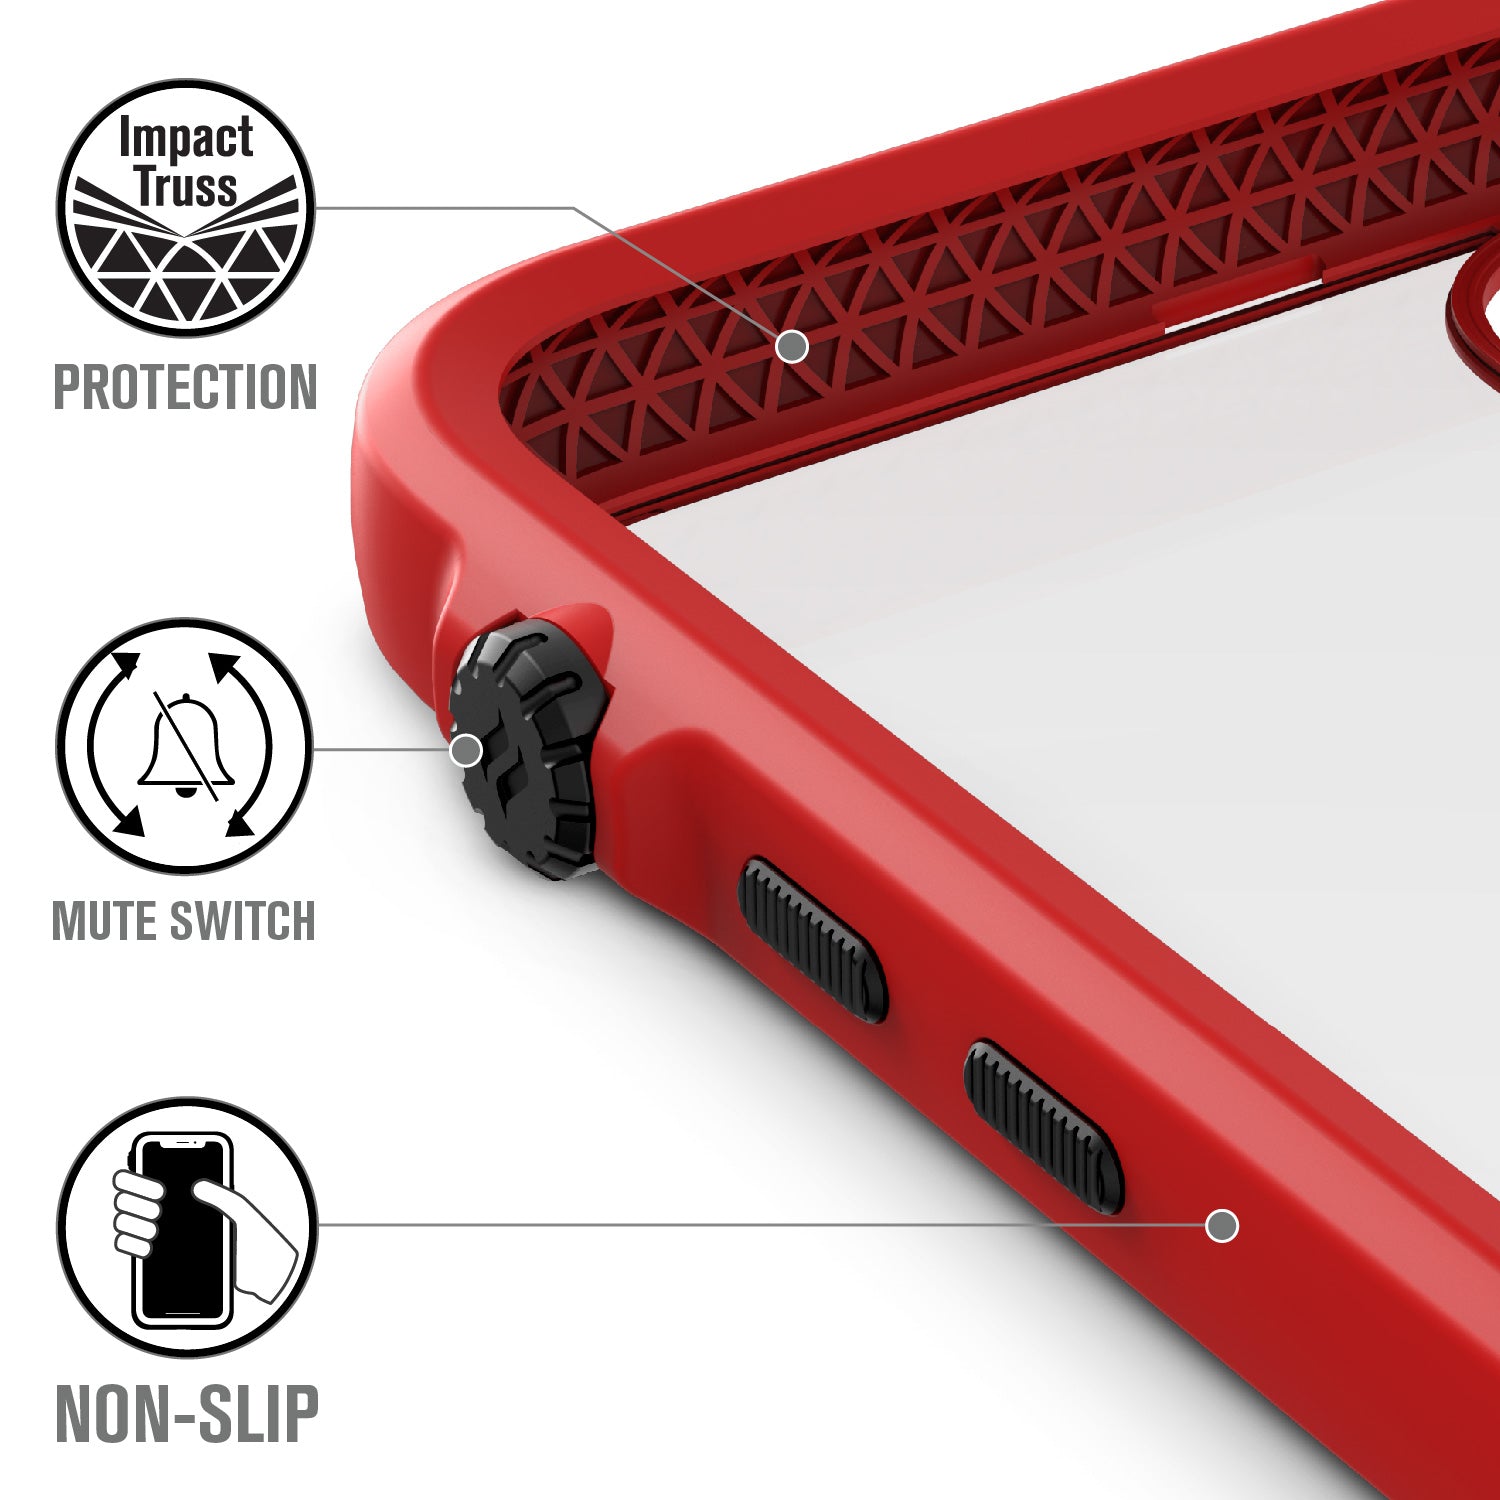 catalyst iPhone 11 series impact protection case flame red showing the impact truss mute switch and buttons of the case for iPhone 11 pro max text reads impact truss protection mute switch non slip